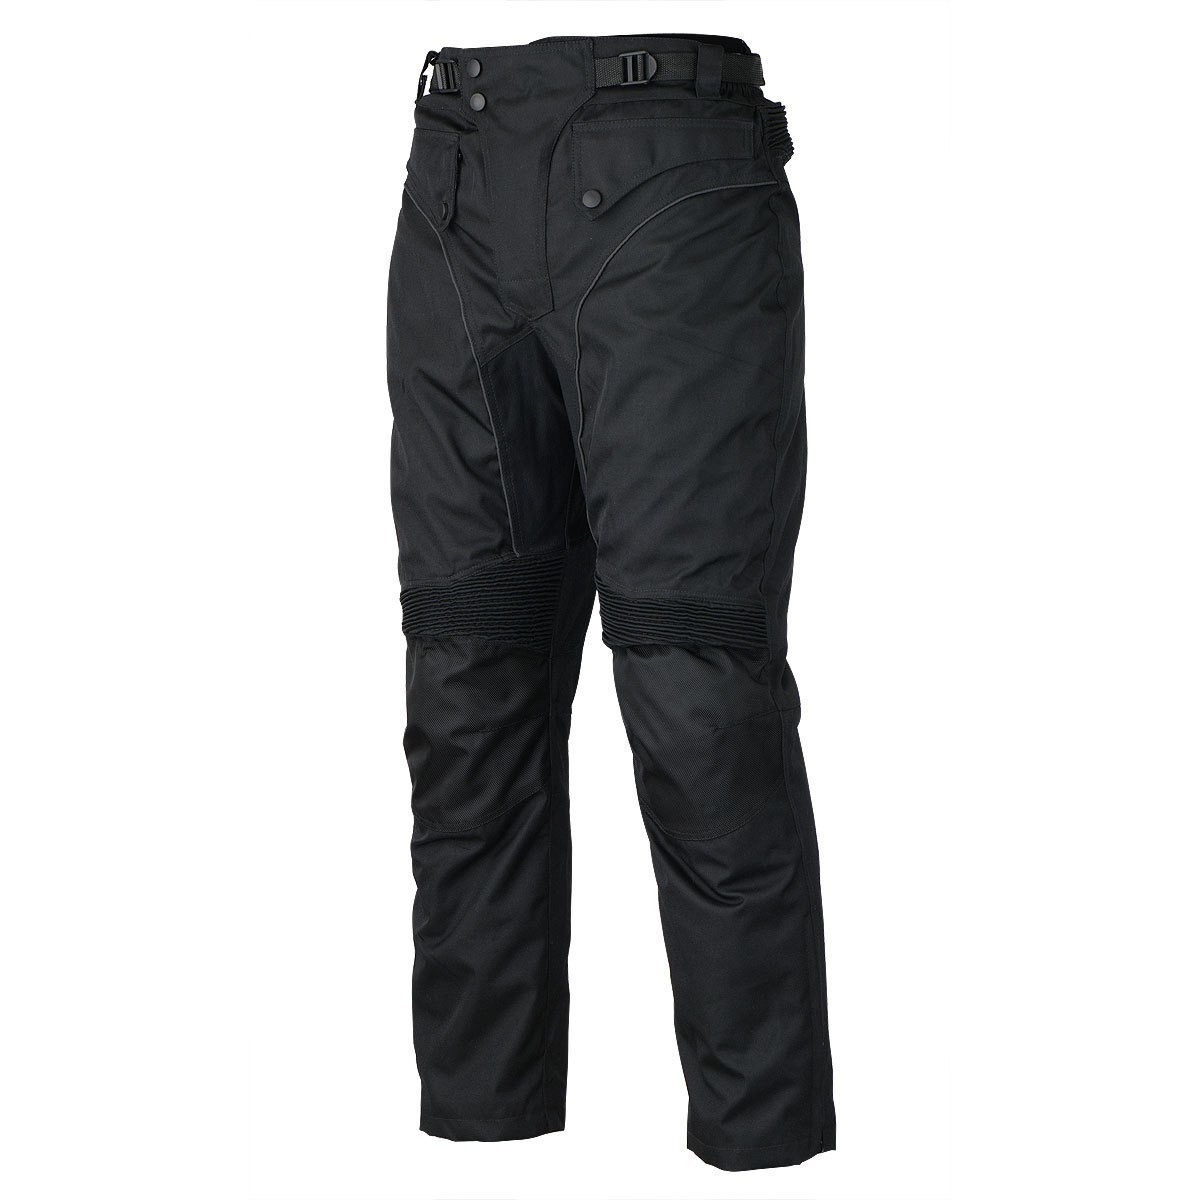 Motorcycle Waterproof Riding Pants Black/Gray with Removable CE Armor PT1